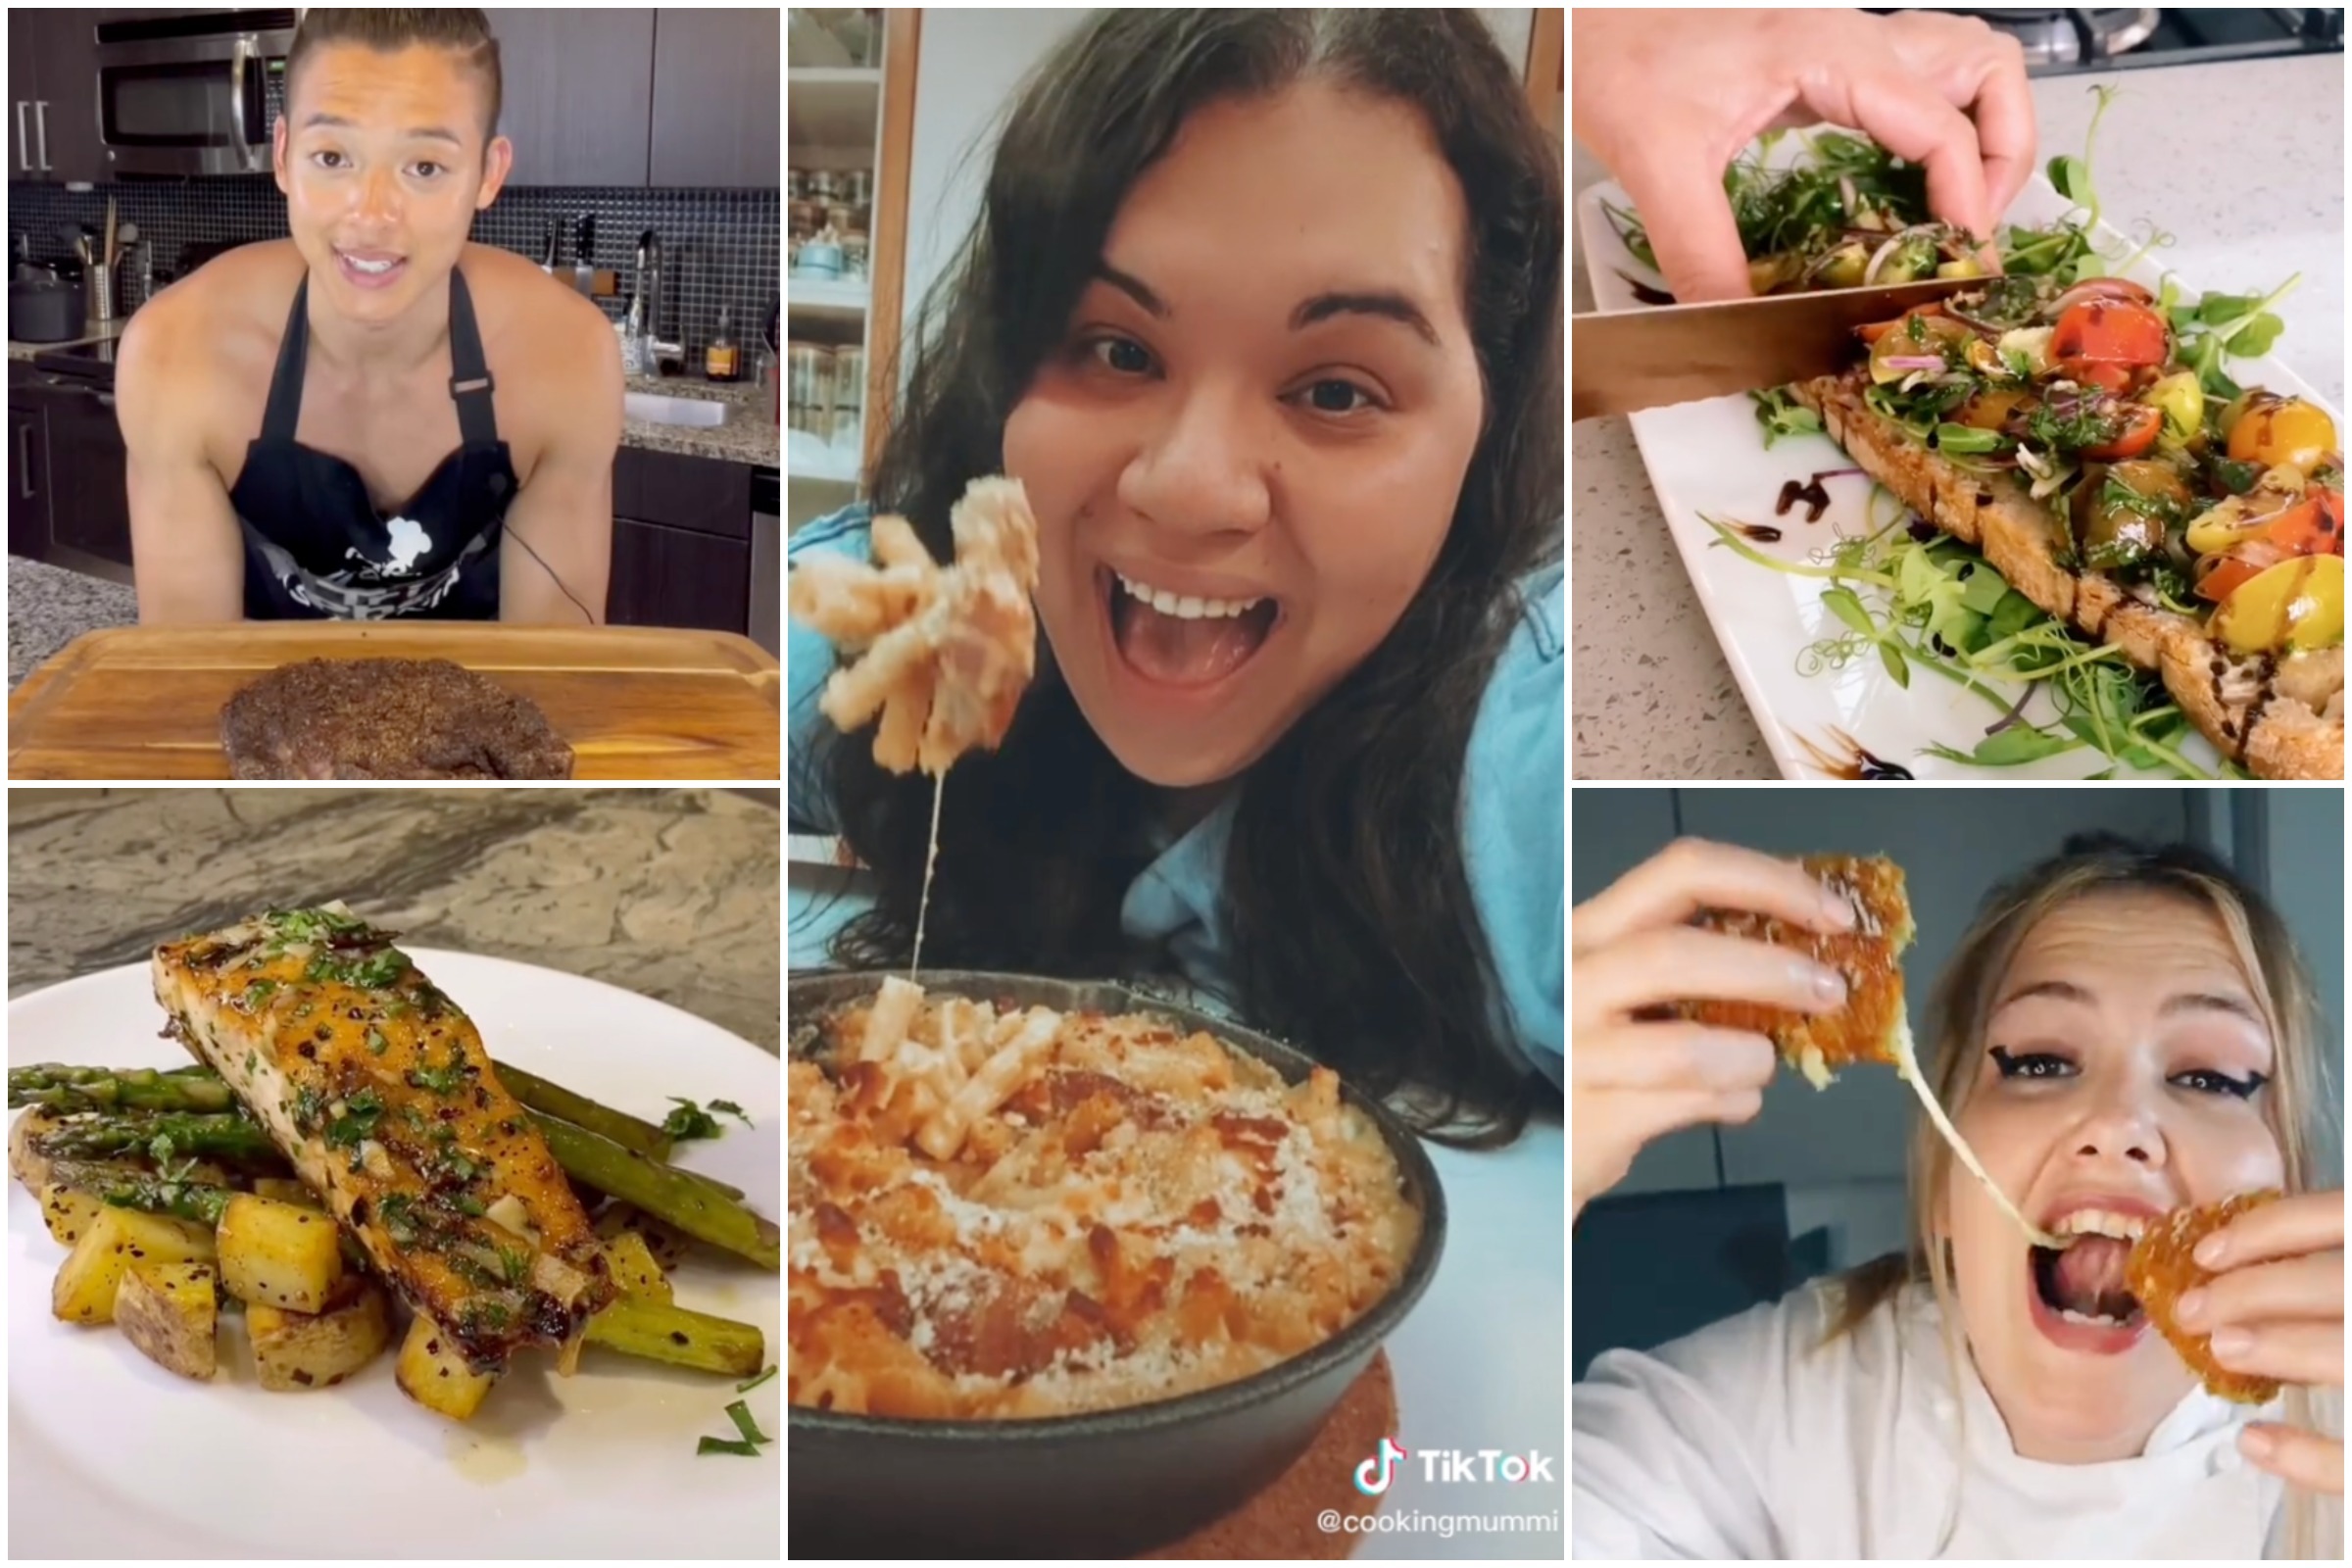 40,000 Home Cooks Gave Perfect Reviews To This TikTok-Famous